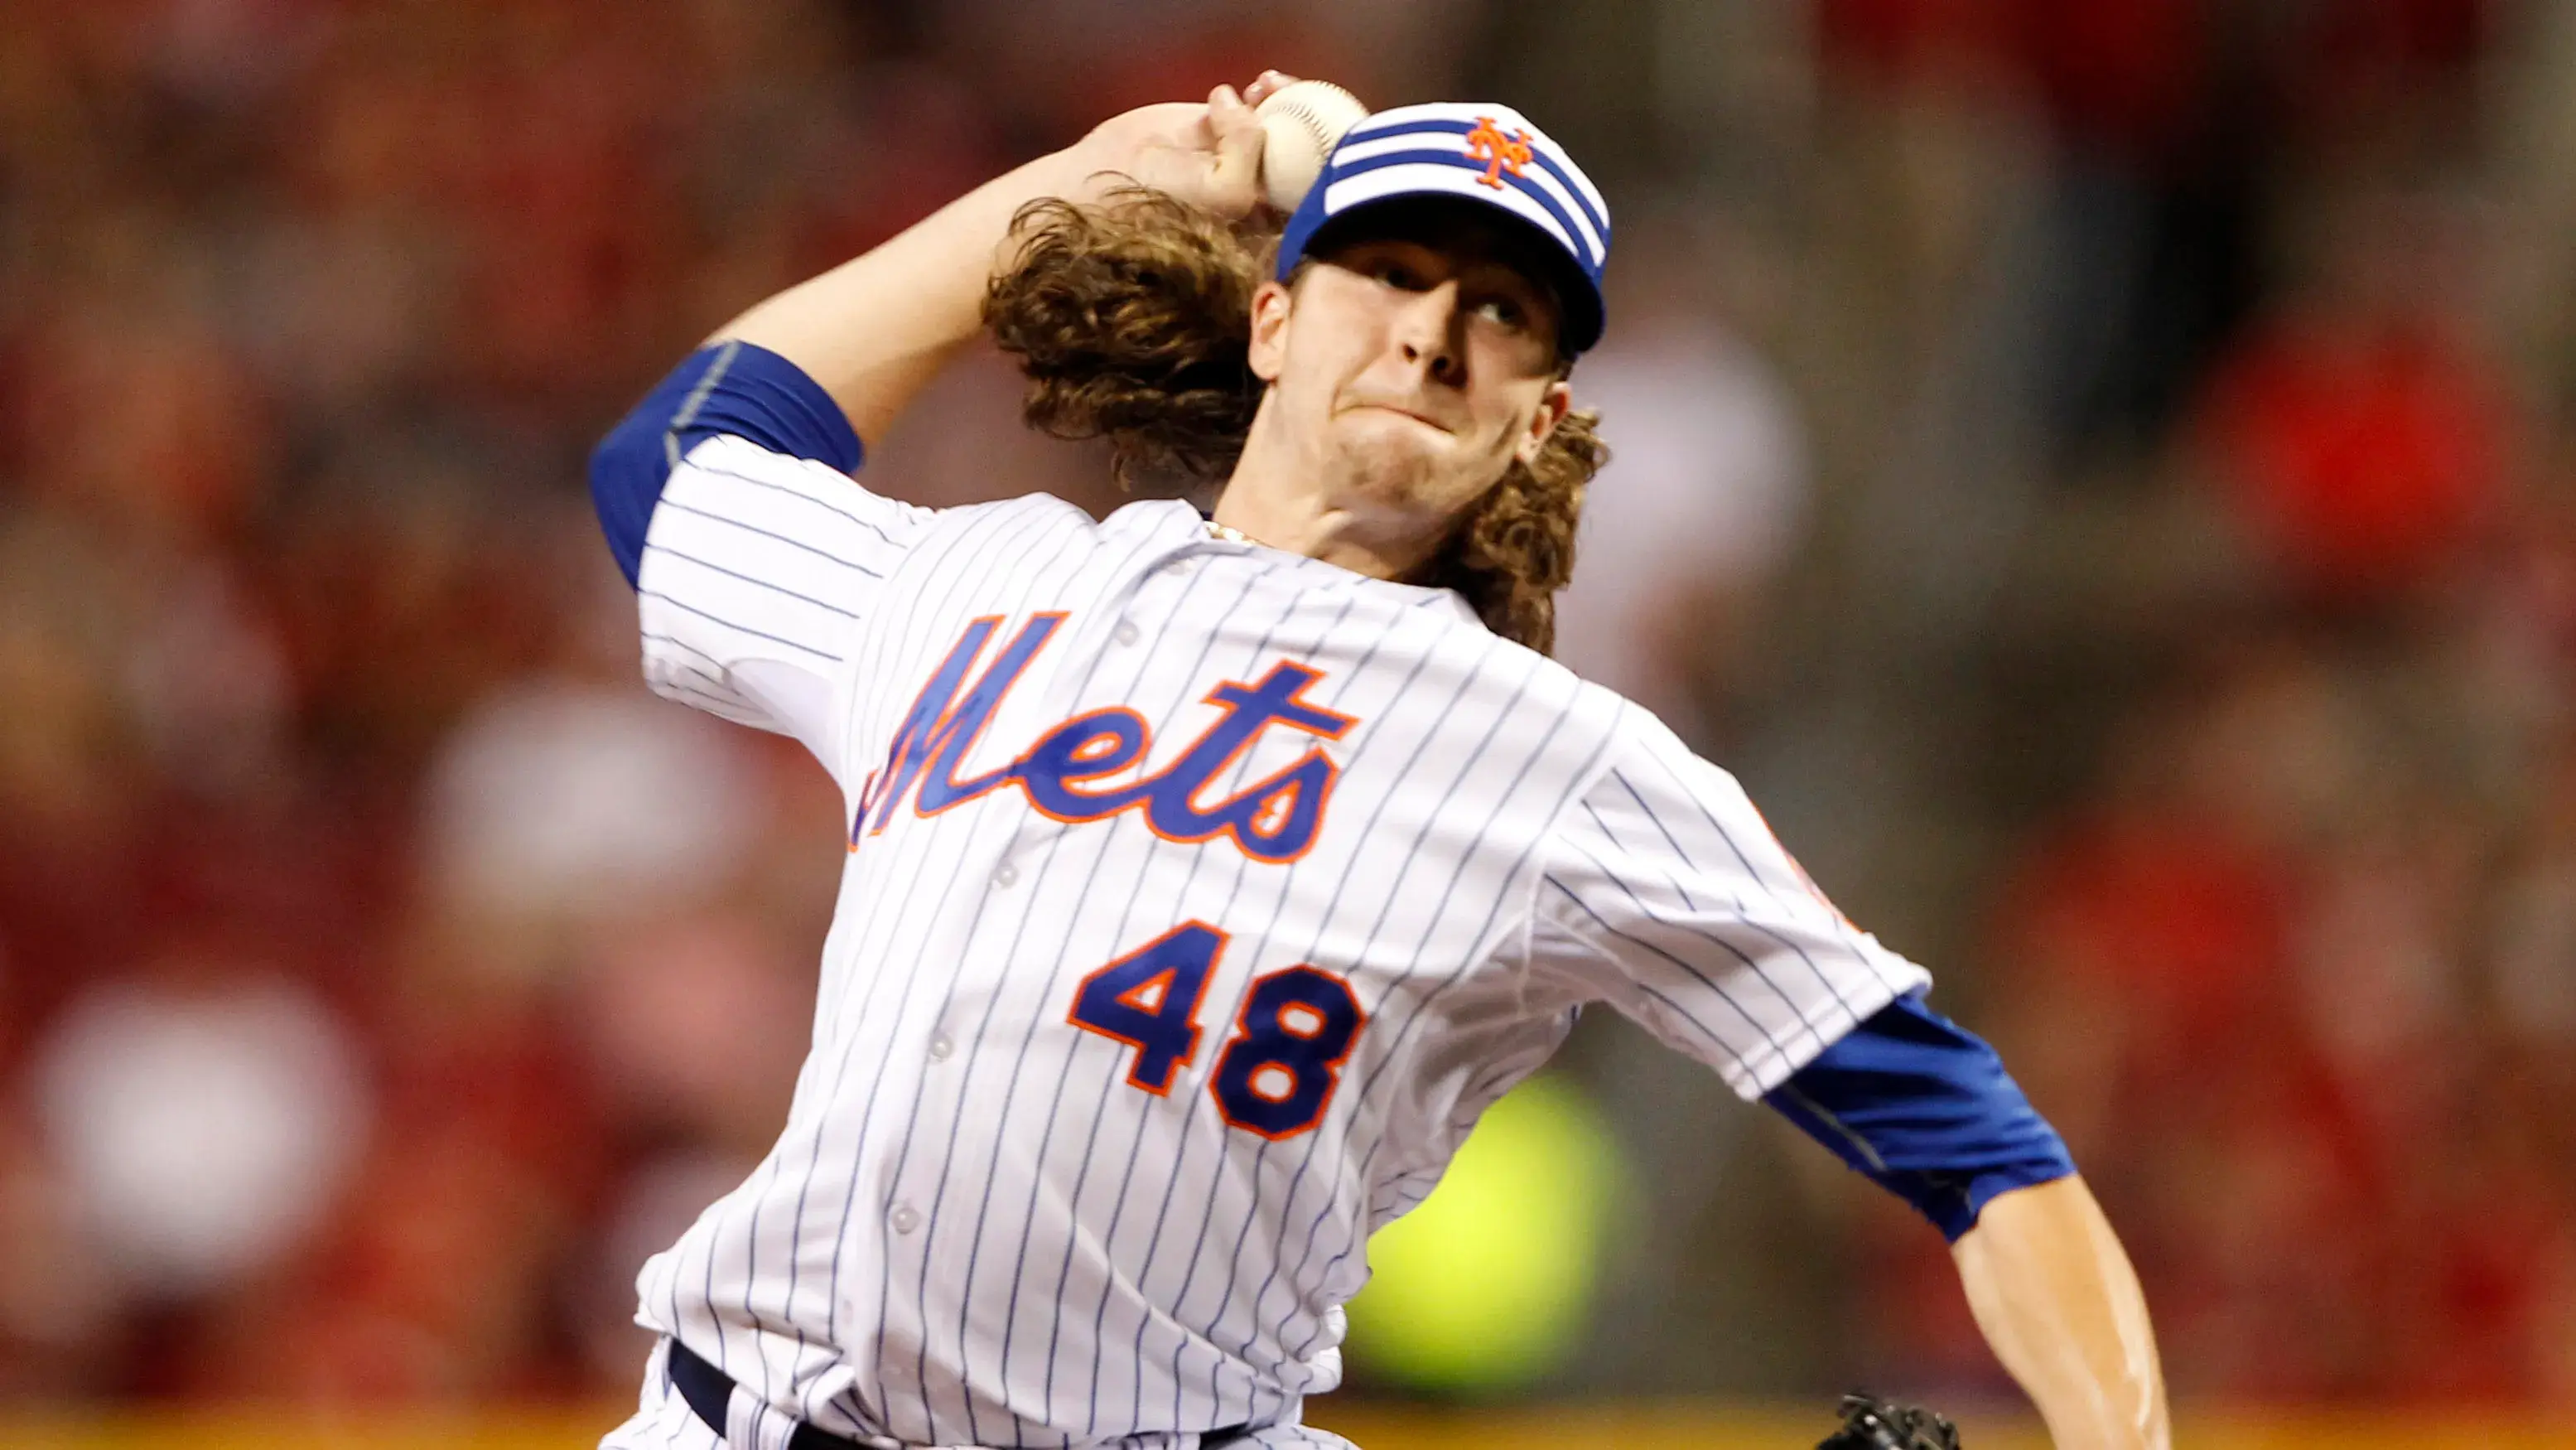 Jul 14, 2015; Cincinnati, OH, USA; National League pitcher Jacob deGrom (48) of the New York Mets throws against the American League during the sixth inning of the 2015 MLB All Star Game at Great American Ball Park. / Frank Victores - USA TODAY Sports